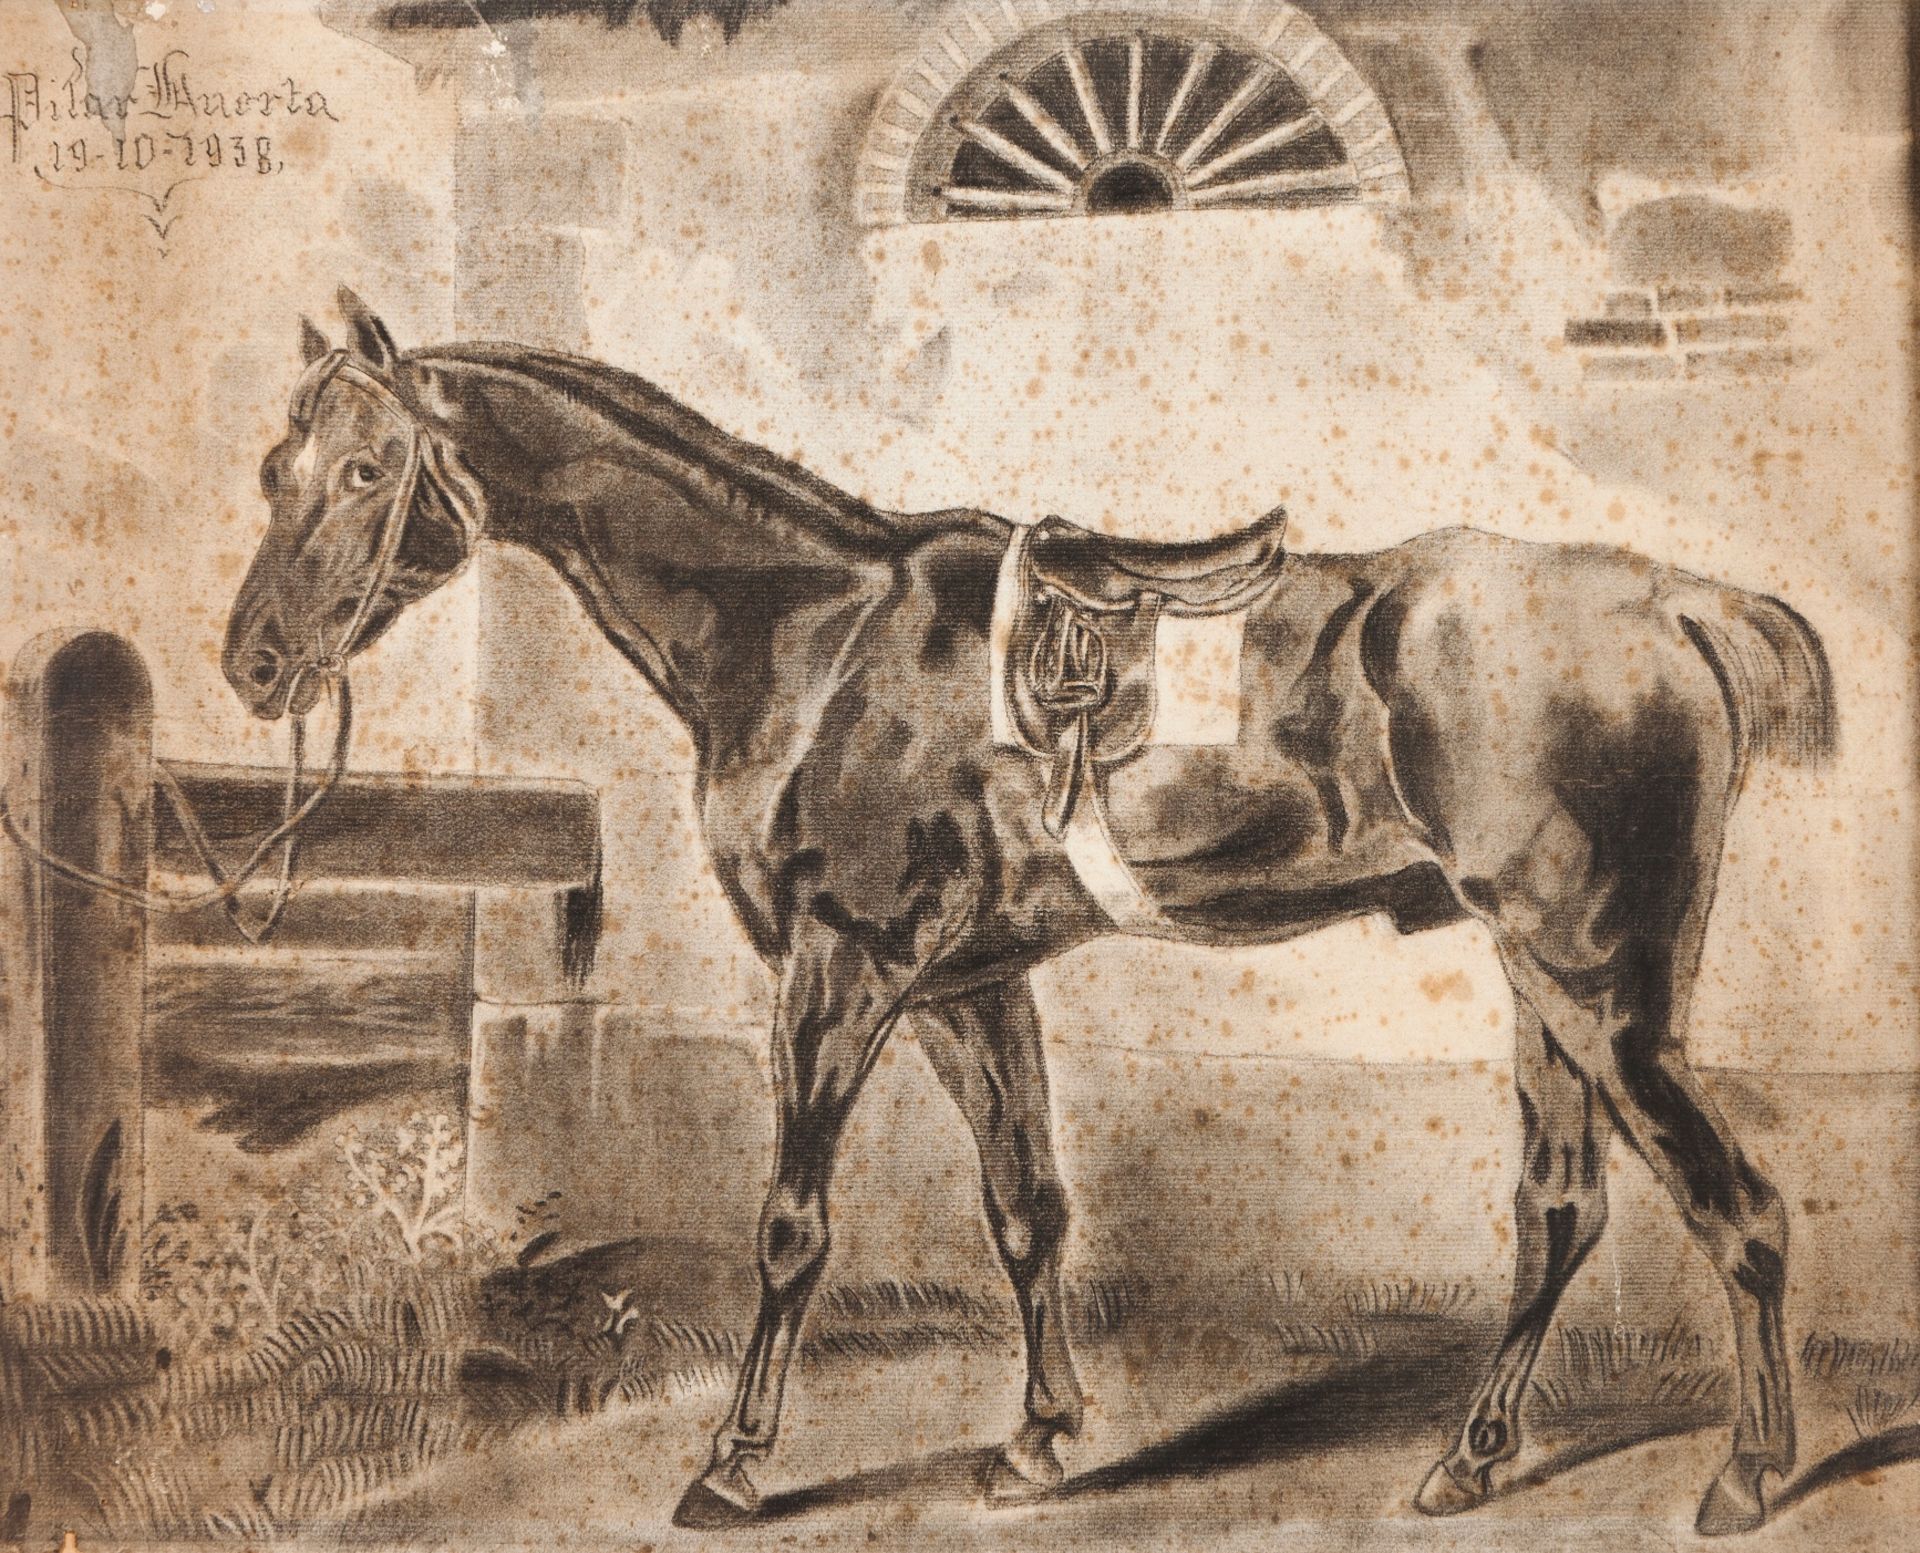 Pilar Huerta (XX)A portrait of a horseChalk on paper Signed and dated 19-10-193846x58cm<